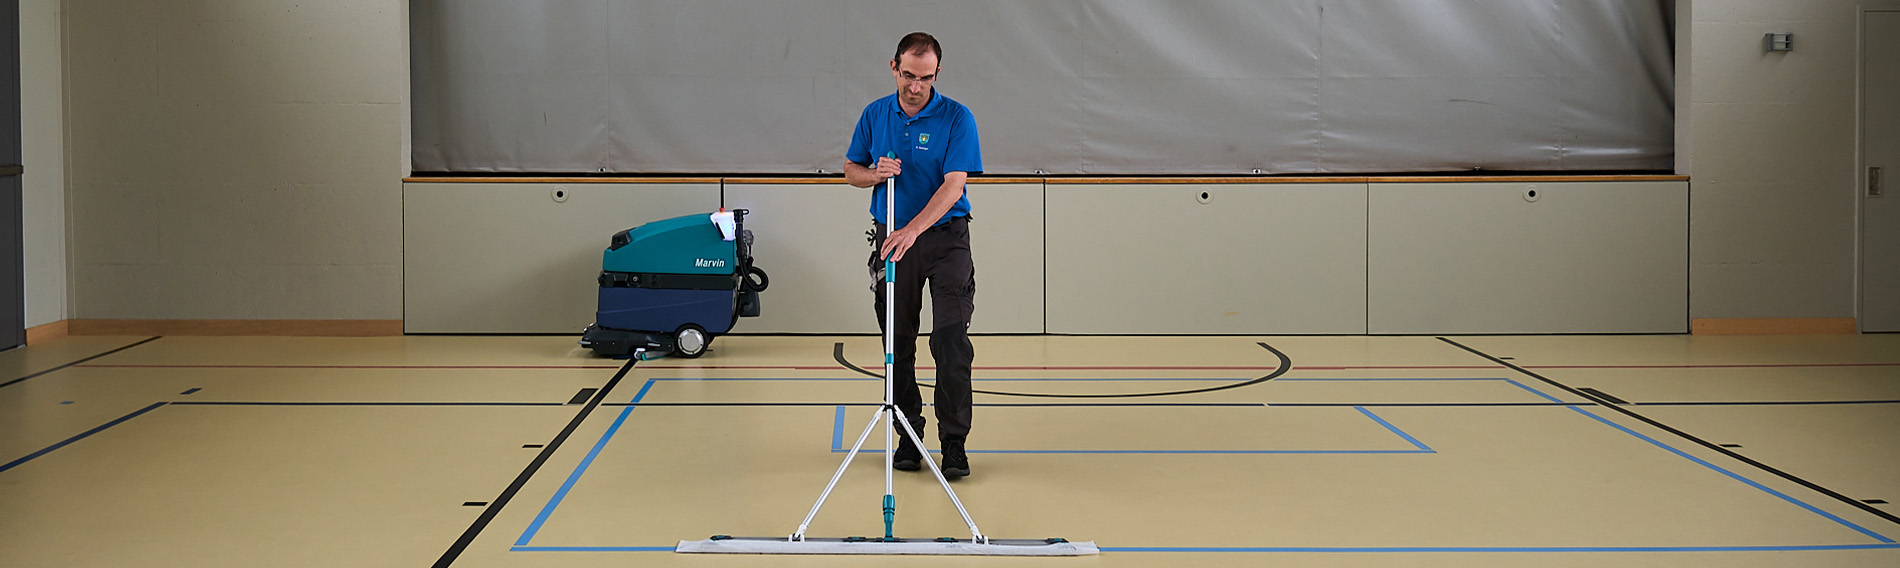 Cleaning robot in the sports hall